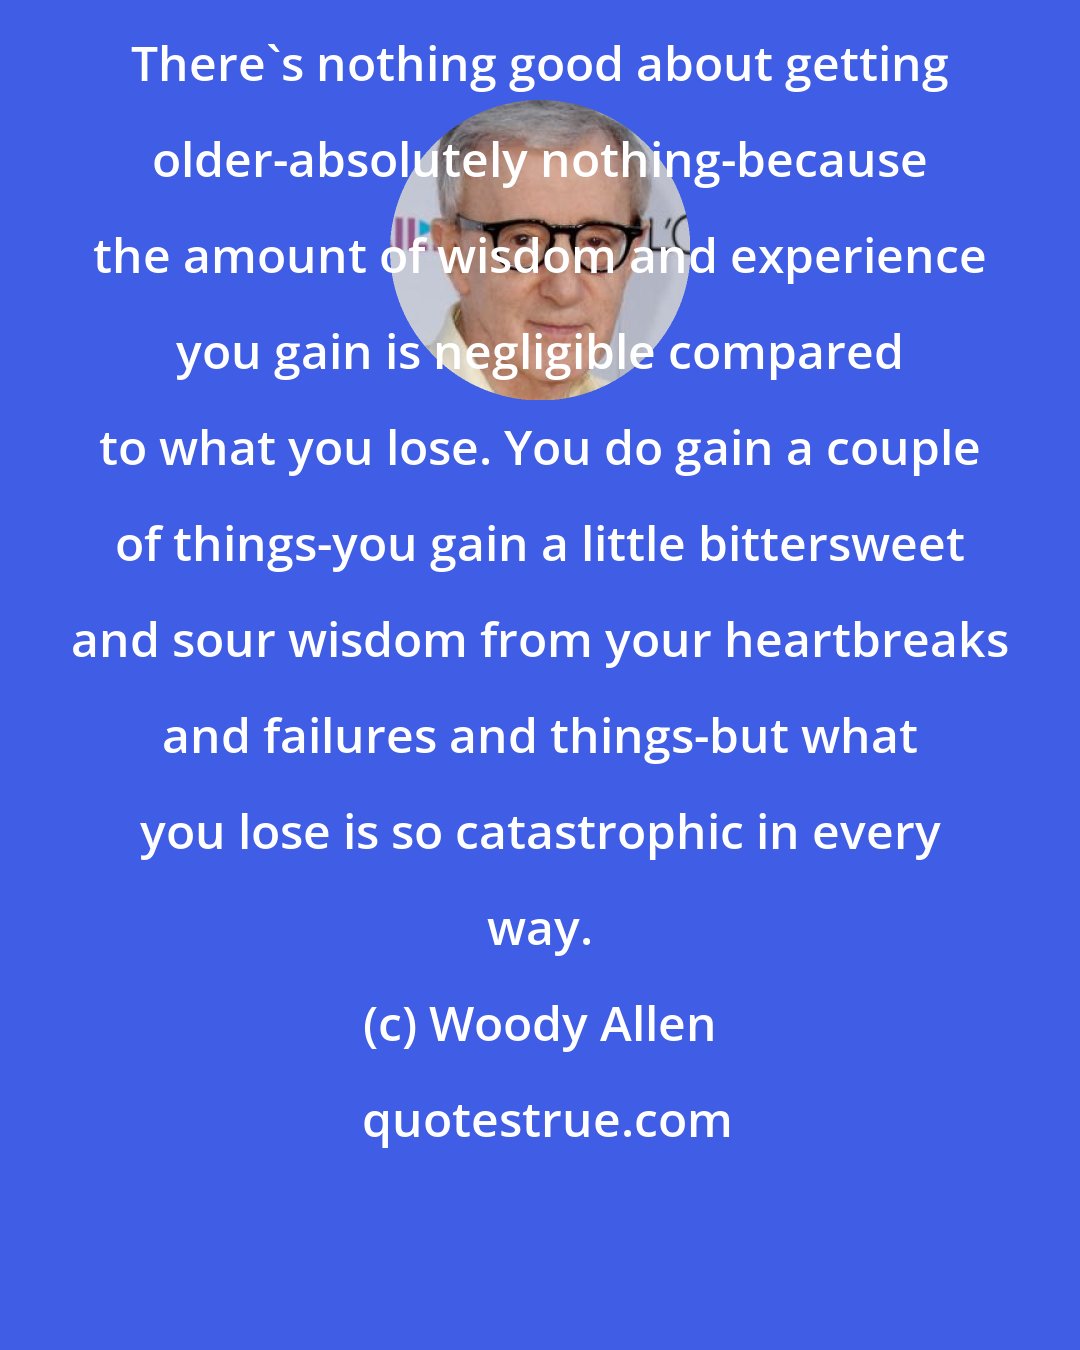 Woody Allen: There's nothing good about getting older-absolutely nothing-because the amount of wisdom and experience you gain is negligible compared to what you lose. You do gain a couple of things-you gain a little bittersweet and sour wisdom from your heartbreaks and failures and things-but what you lose is so catastrophic in every way.